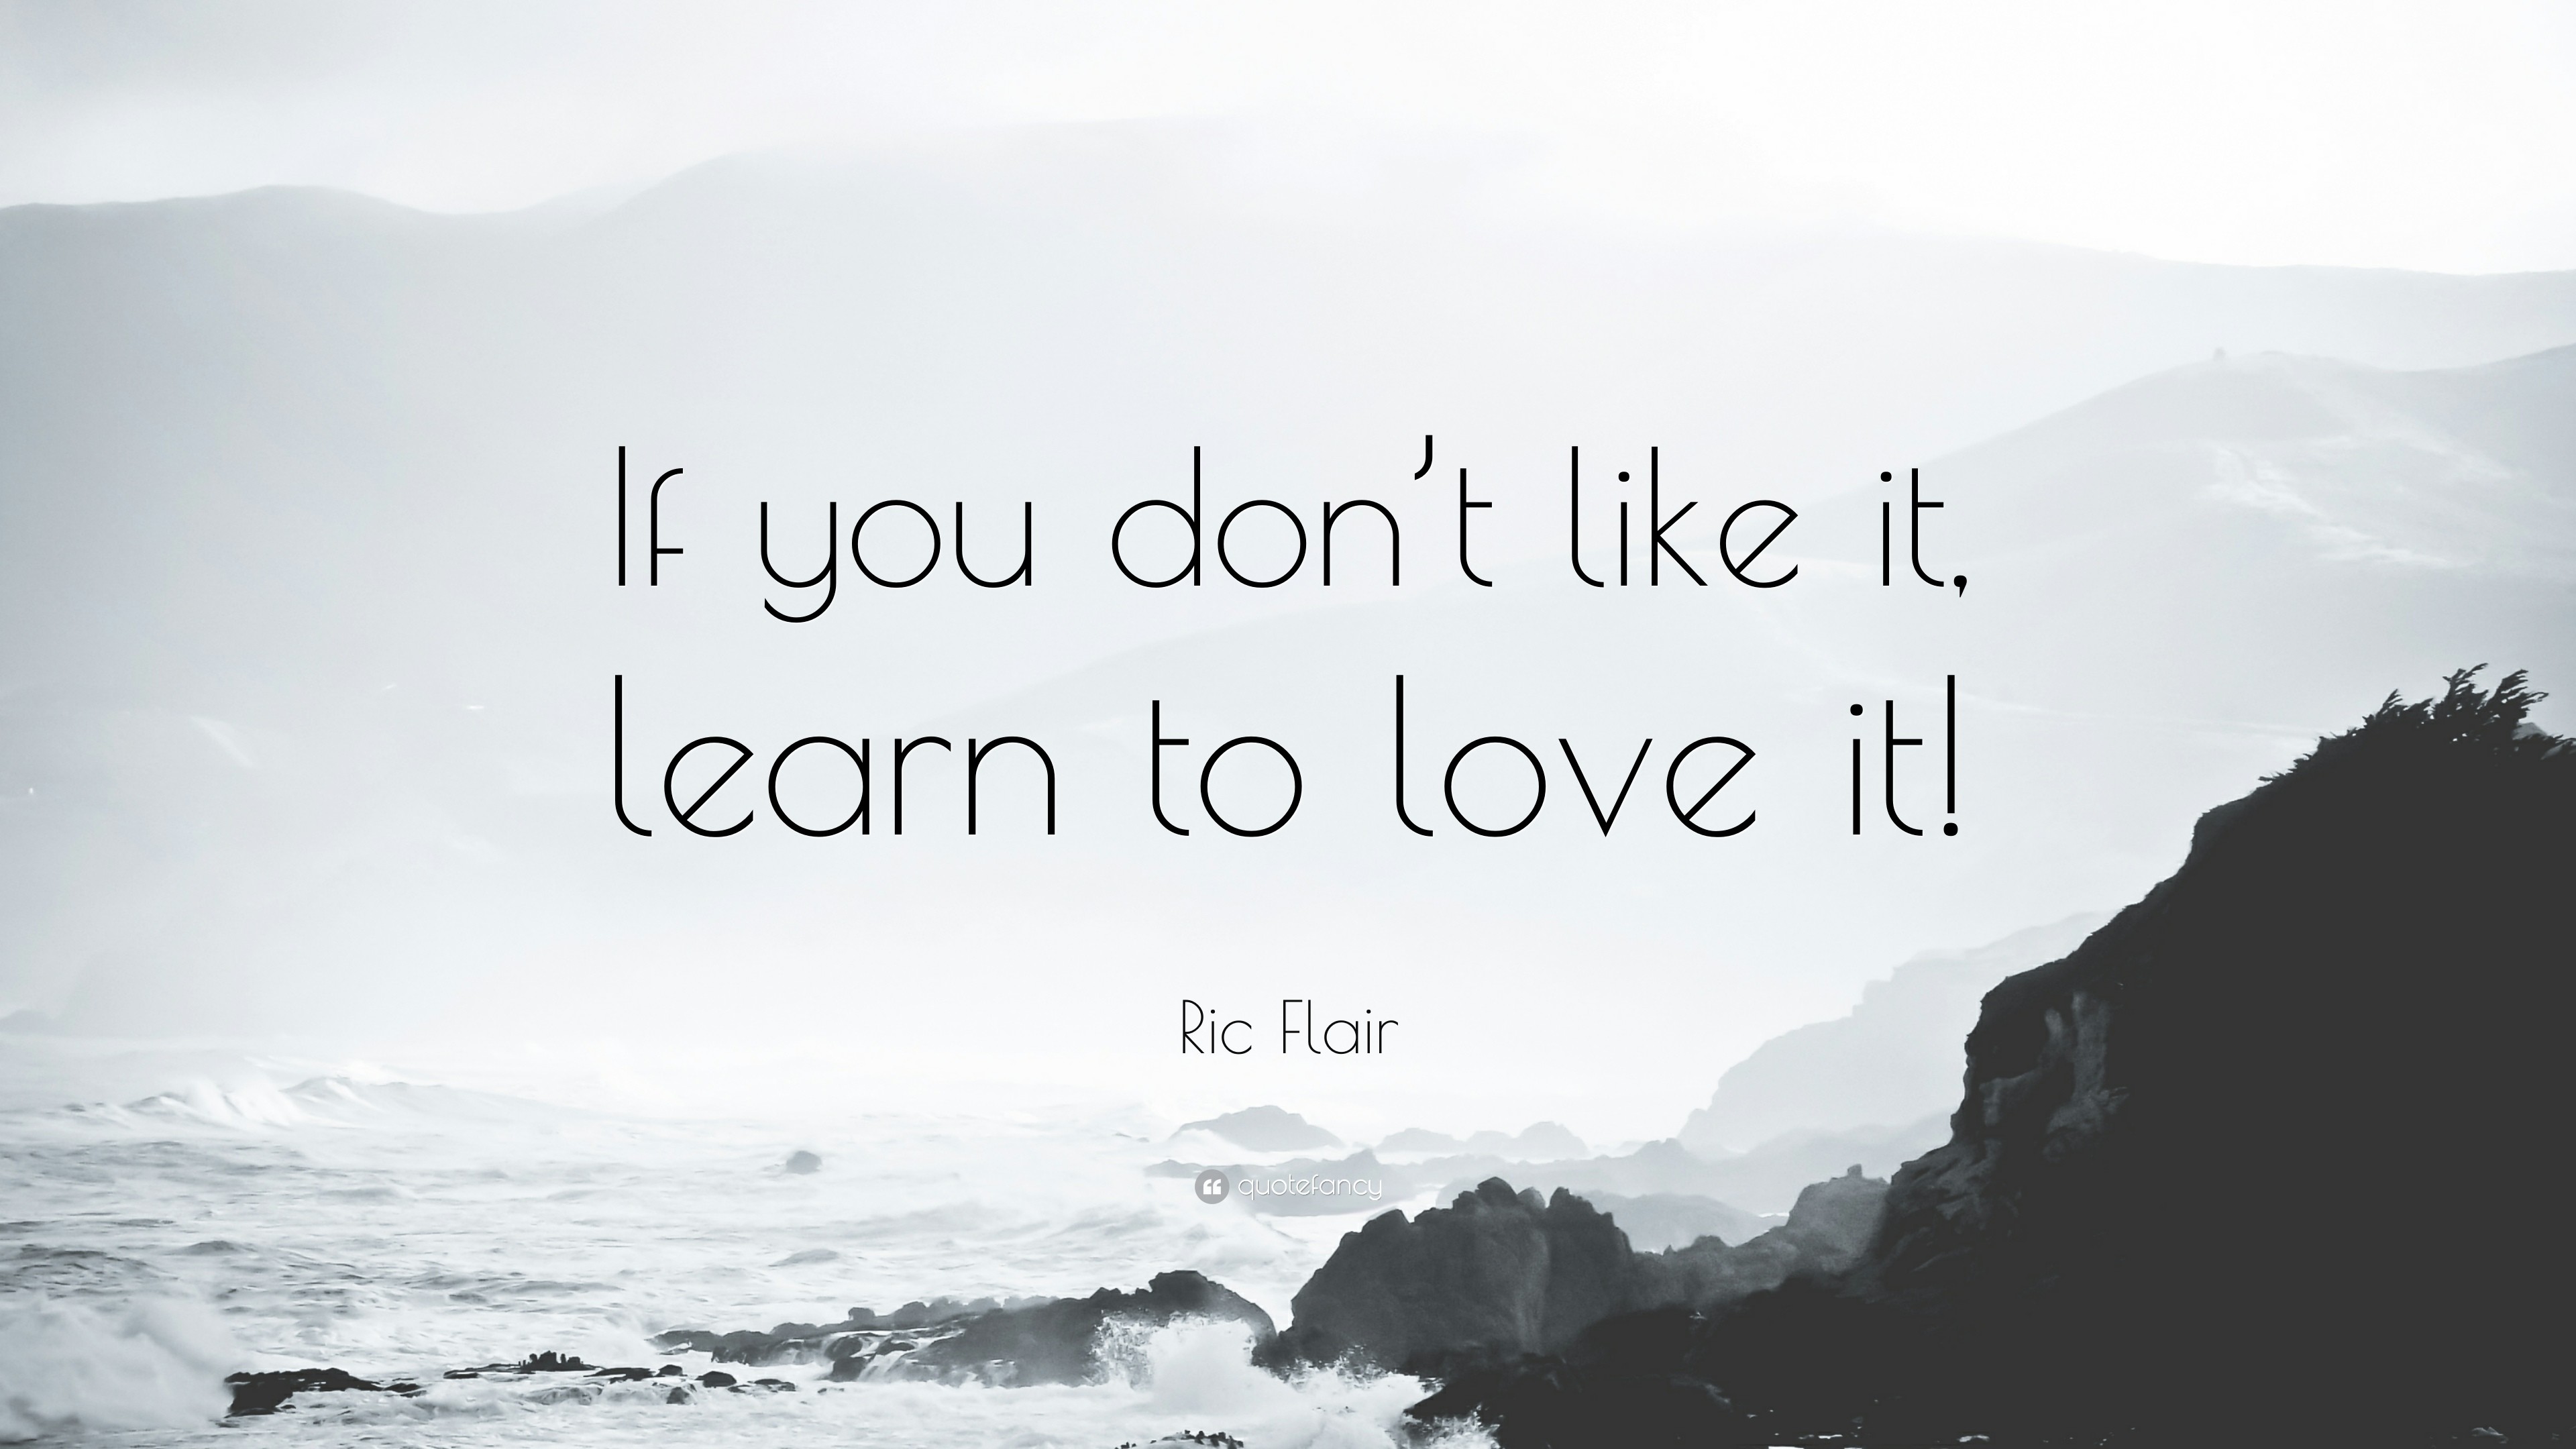 3840x2160 Ric Flair Quote: “If you don't like it, learn to love